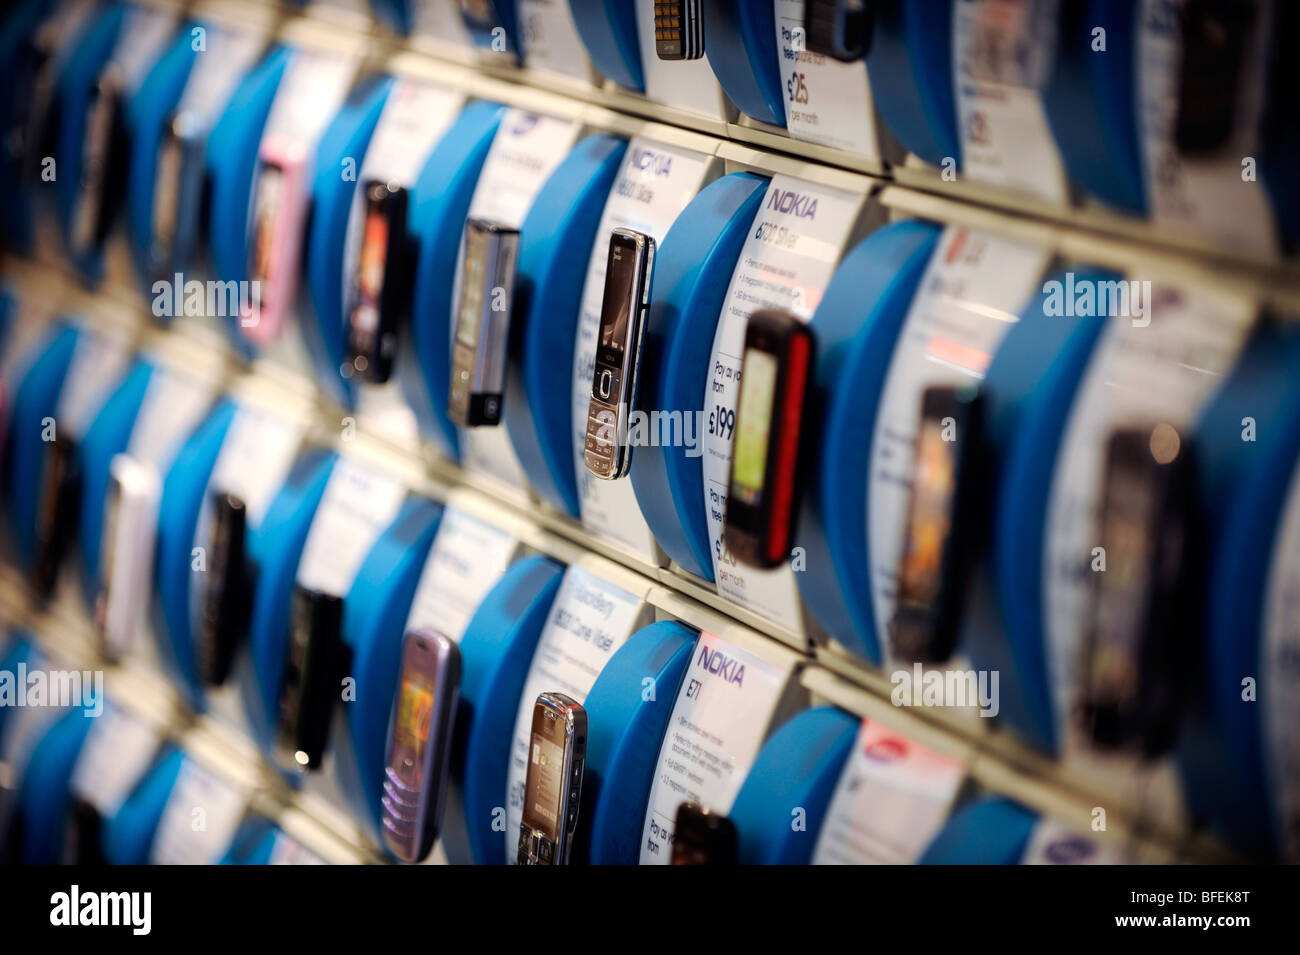 Mobile phones on sale in high street chain store Carphone Warehouse. Stock Photo